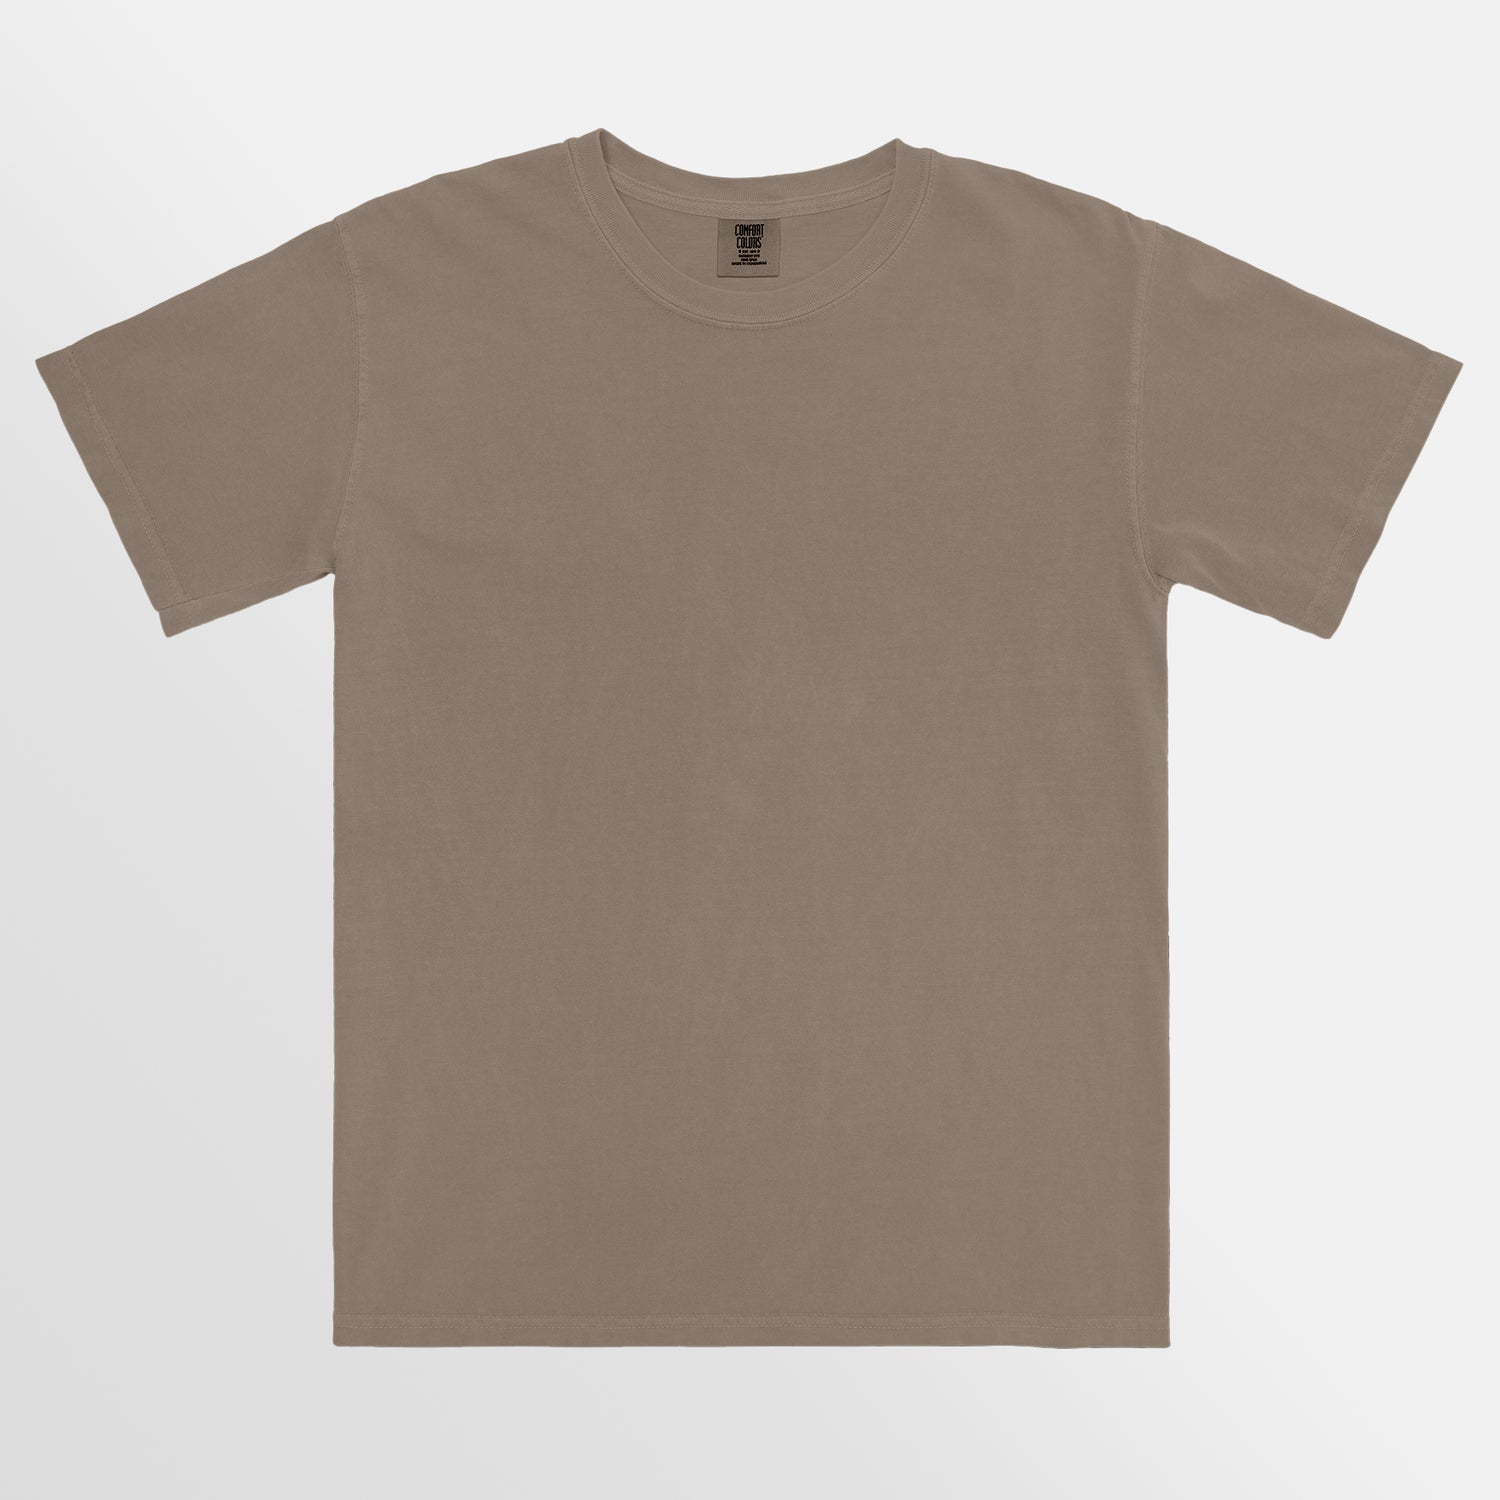 Unisex Comfort Colours Tee - On Request